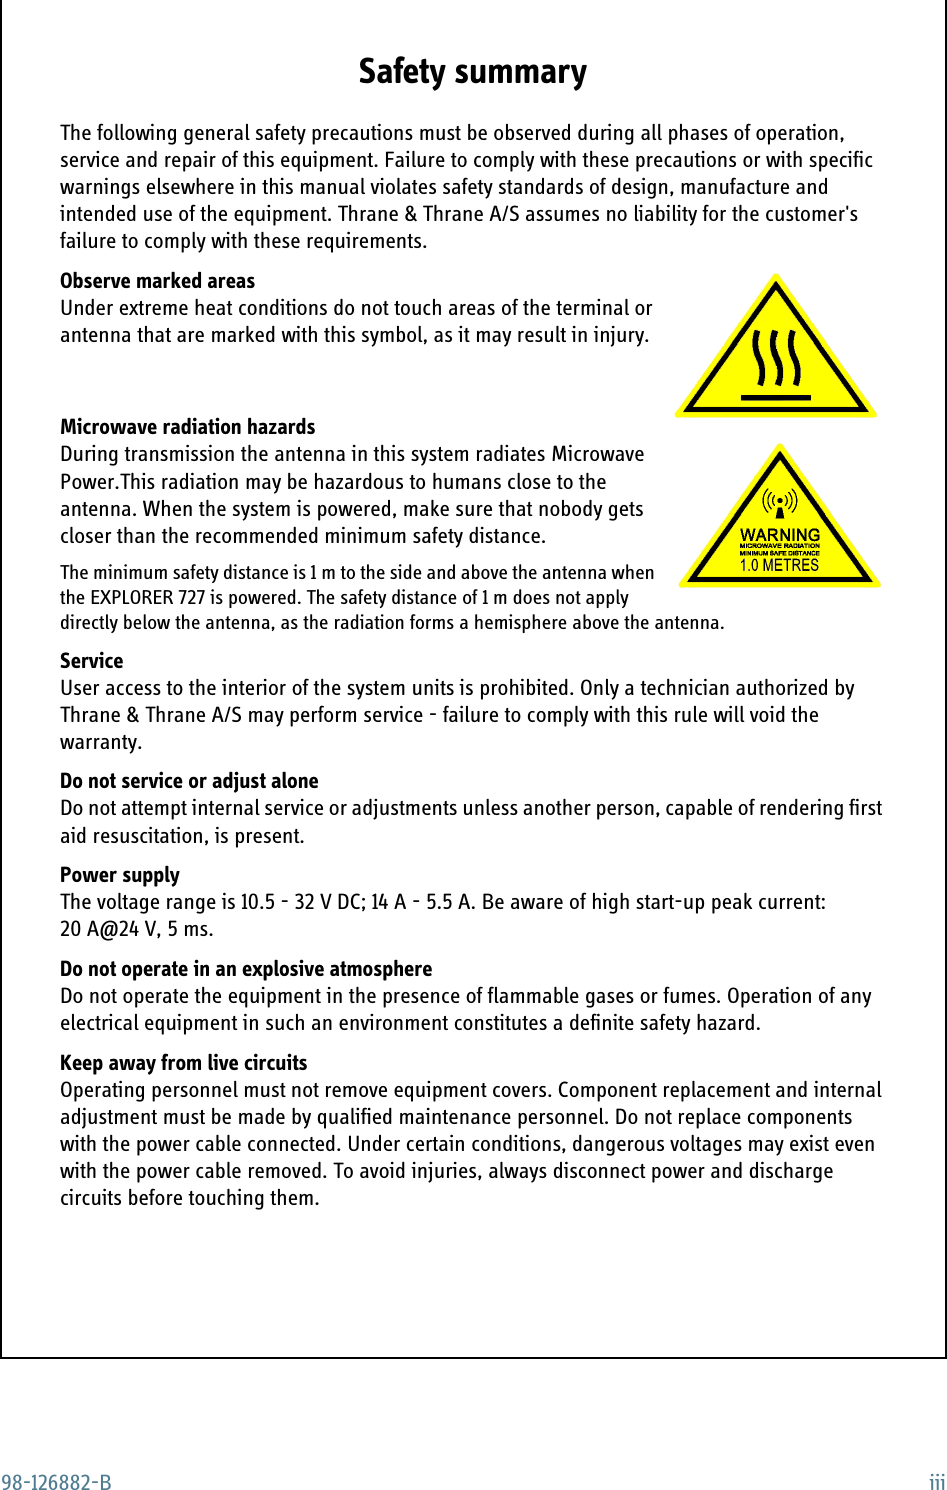 98-126882-B iiiSafety summary 1The following general safety precautions must be observed during all phases of operation, service and repair of this equipment. Failure to comply with these precautions or with specific warnings elsewhere in this manual violates safety standards of design, manufacture and intended use of the equipment. Thrane &amp; Thrane A/S assumes no liability for the customer&apos;s failure to comply with these requirements.Observe marked areasUnder extreme heat conditions do not touch areas of the terminal or antenna that are marked with this symbol, as it may result in injury.Microwave radiation hazardsDuring transmission the antenna in this system radiates Microwave Power.This radiation may be hazardous to humans close to the antenna. When the system is powered, make sure that nobody gets closer than the recommended minimum safety distance. The minimum safety distance is 1 m to the side and above the antenna when the EXPLORER 727 is powered. The safety distance of 1 m does not apply directly below the antenna, as the radiation forms a hemisphere above the antenna.ServiceUser access to the interior of the system units is prohibited. Only a technician authorized by Thrane &amp; Thrane A/S may perform service - failure to comply with this rule will void the warranty.Do not service or adjust aloneDo not attempt internal service or adjustments unless another person, capable of rendering first aid resuscitation, is present.Power supplyThe voltage range is 10.5 - 32 V DC; 14 A - 5.5 A. Be aware of high start-up peak current: 20 A@24 V, 5 ms.Do not operate in an explosive atmosphereDo not operate the equipment in the presence of flammable gases or fumes. Operation of any electrical equipment in such an environment constitutes a definite safety hazard.Keep away from live circuitsOperating personnel must not remove equipment covers. Component replacement and internal adjustment must be made by qualified maintenance personnel. Do not replace components with the power cable connected. Under certain conditions, dangerous voltages may exist even with the power cable removed. To avoid injuries, always disconnect power and discharge circuits before touching them.